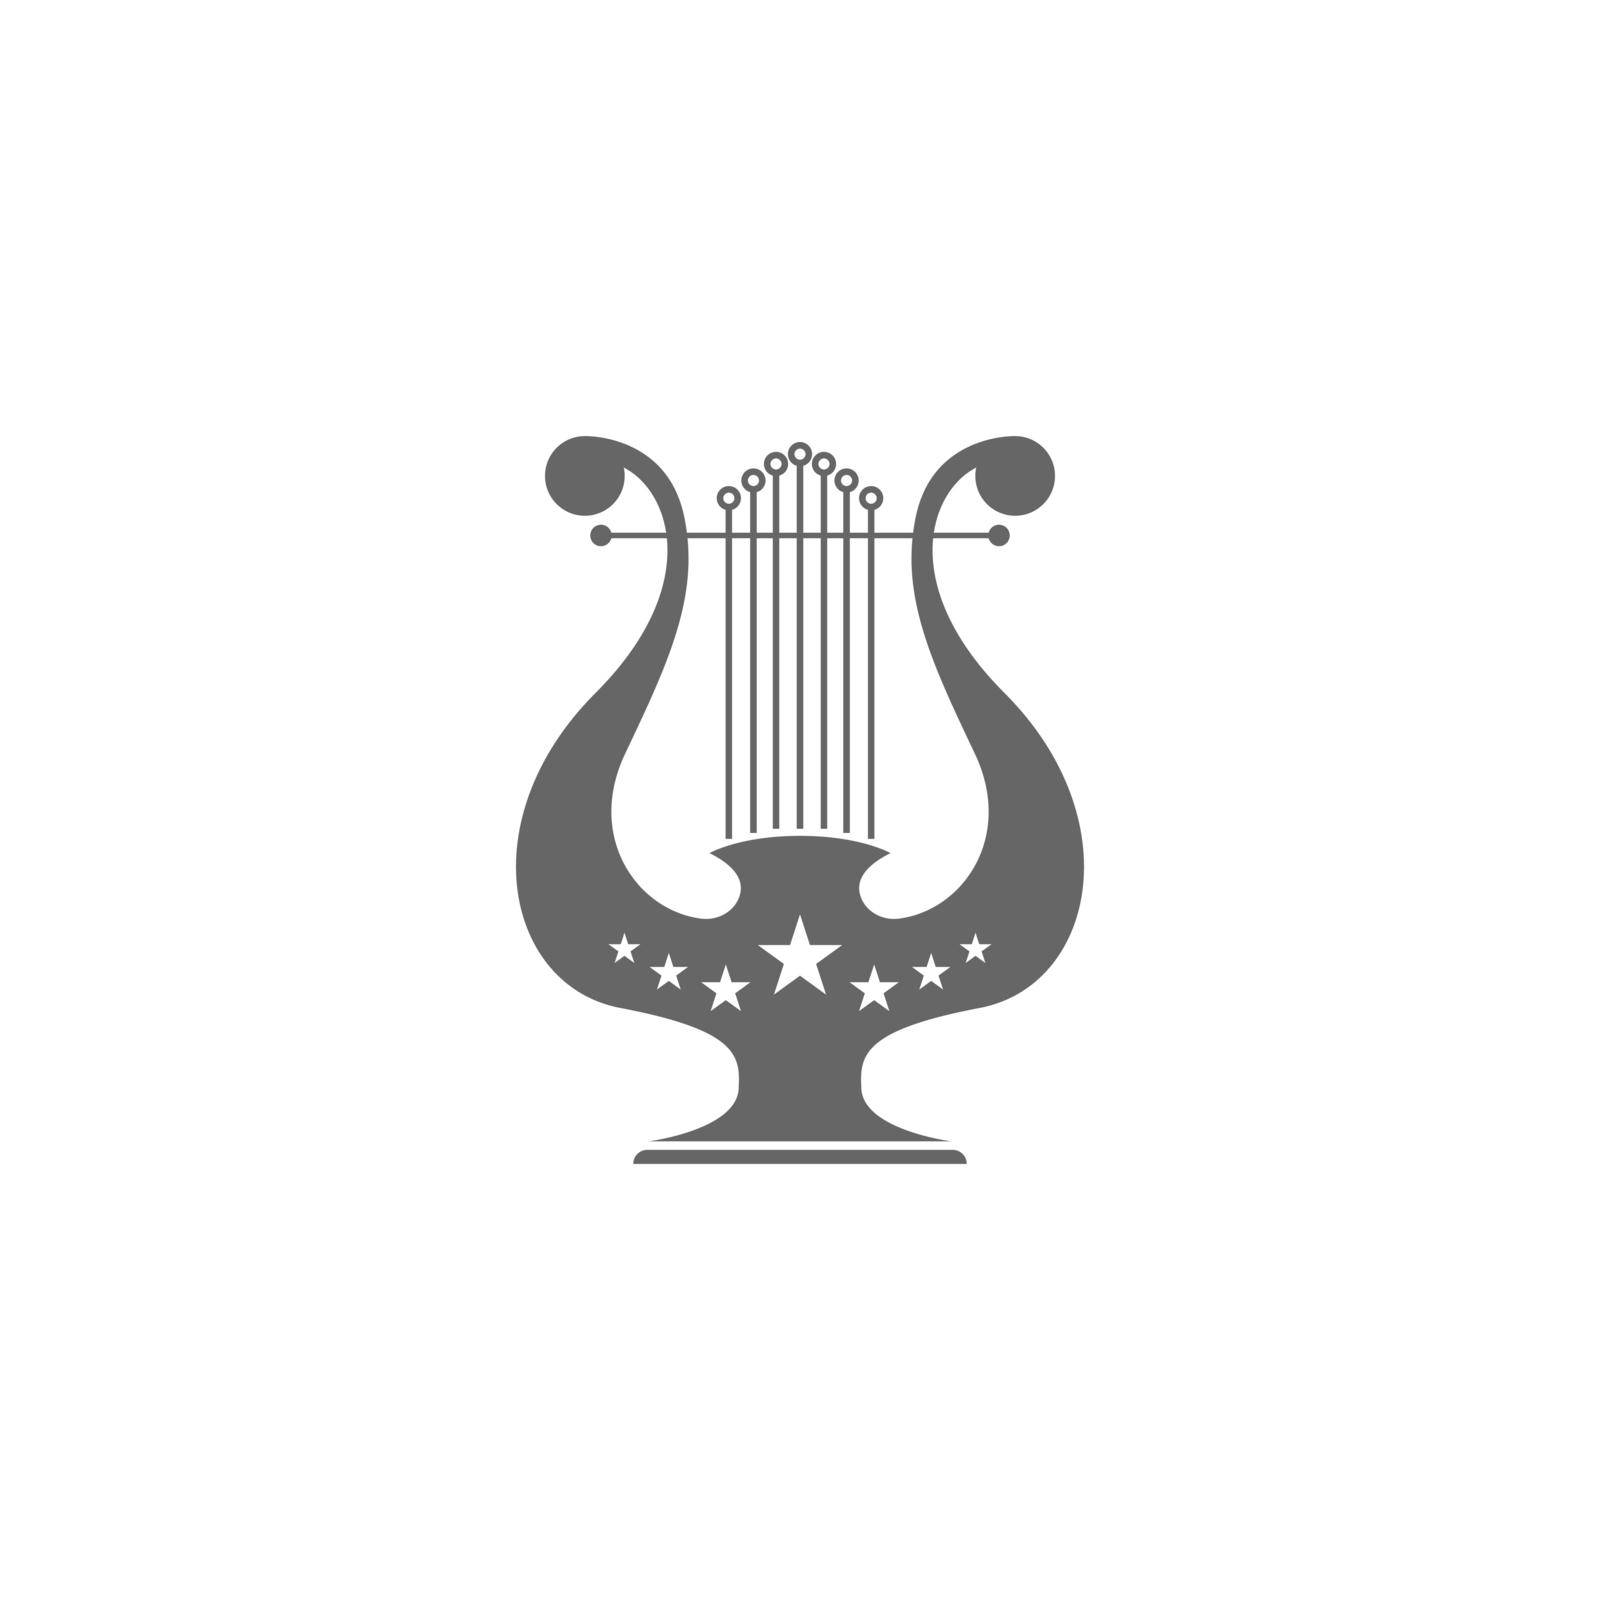 Harp musical instrument icon illustration by bellaxbudhong3